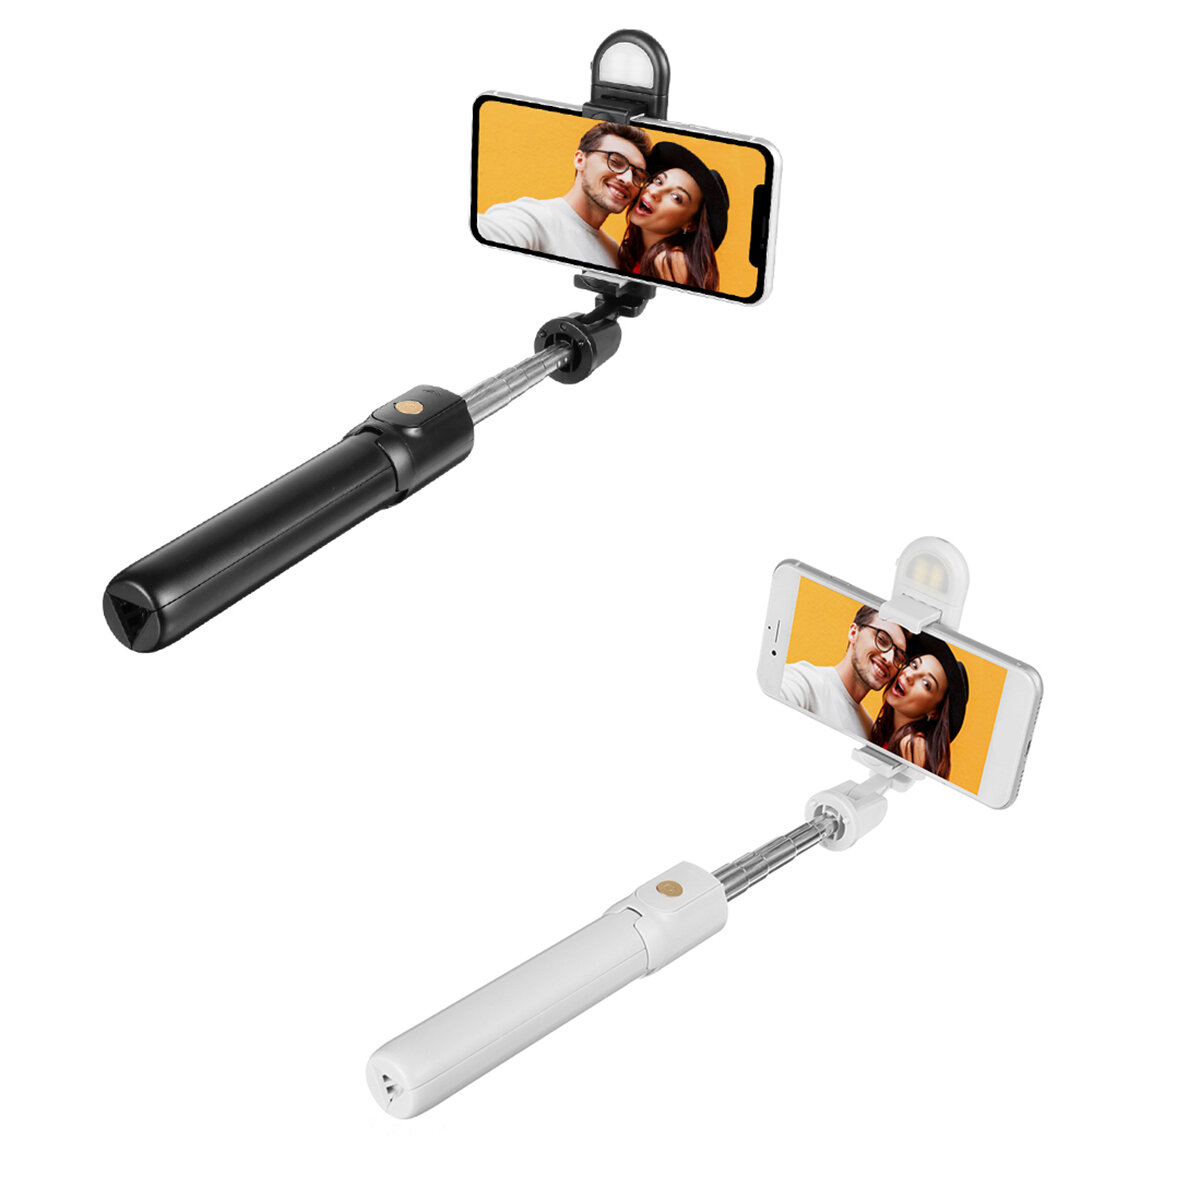 Selfie stick with ring light